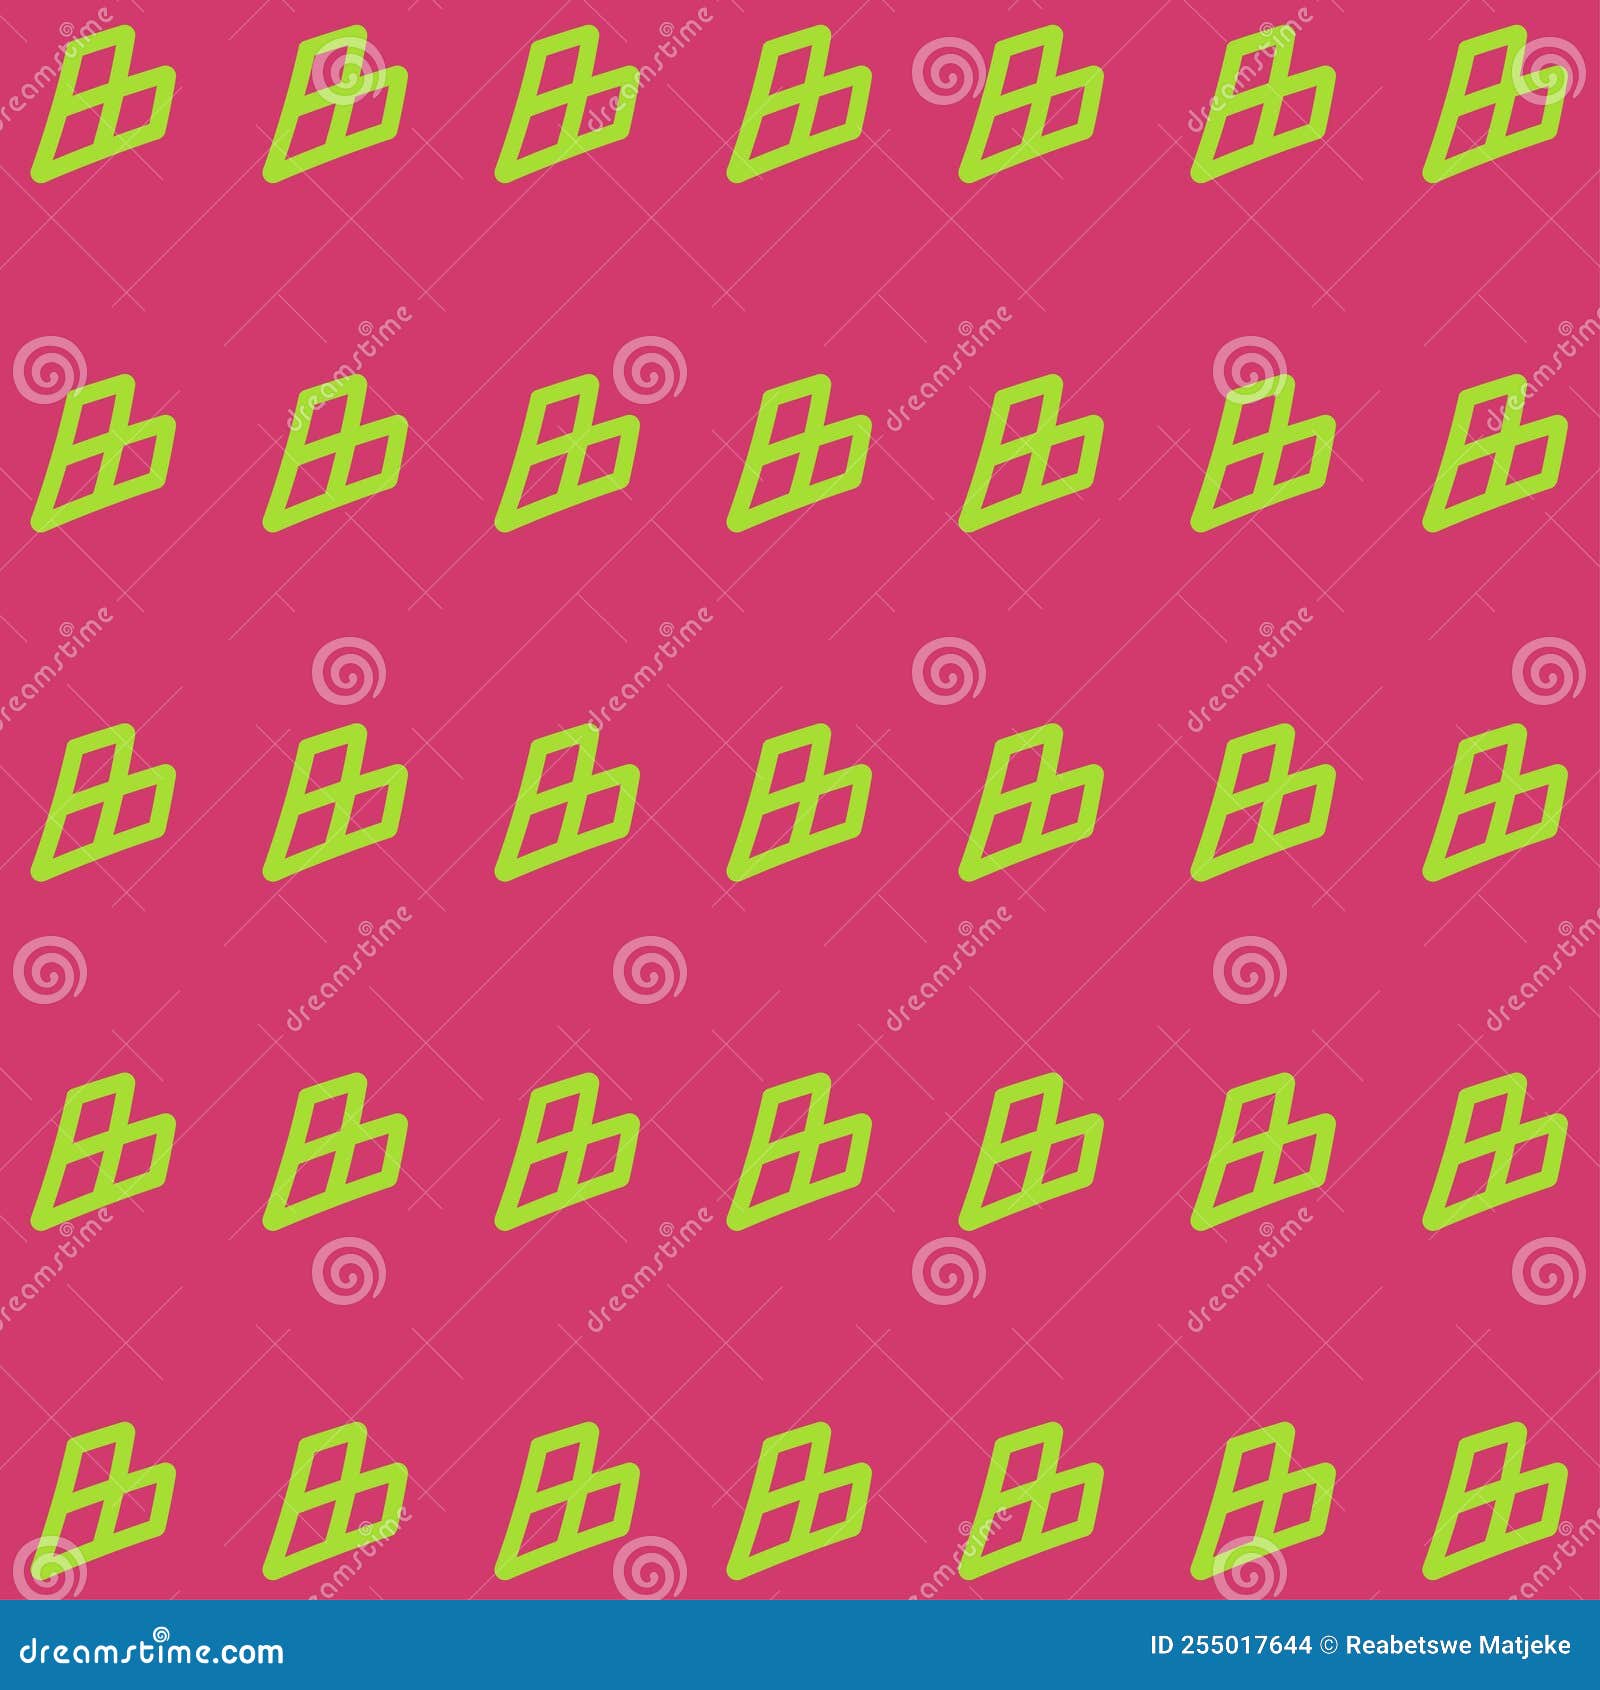 A Symmetric Heart Shape Repeating Seamless Pattern Stock Vector ...